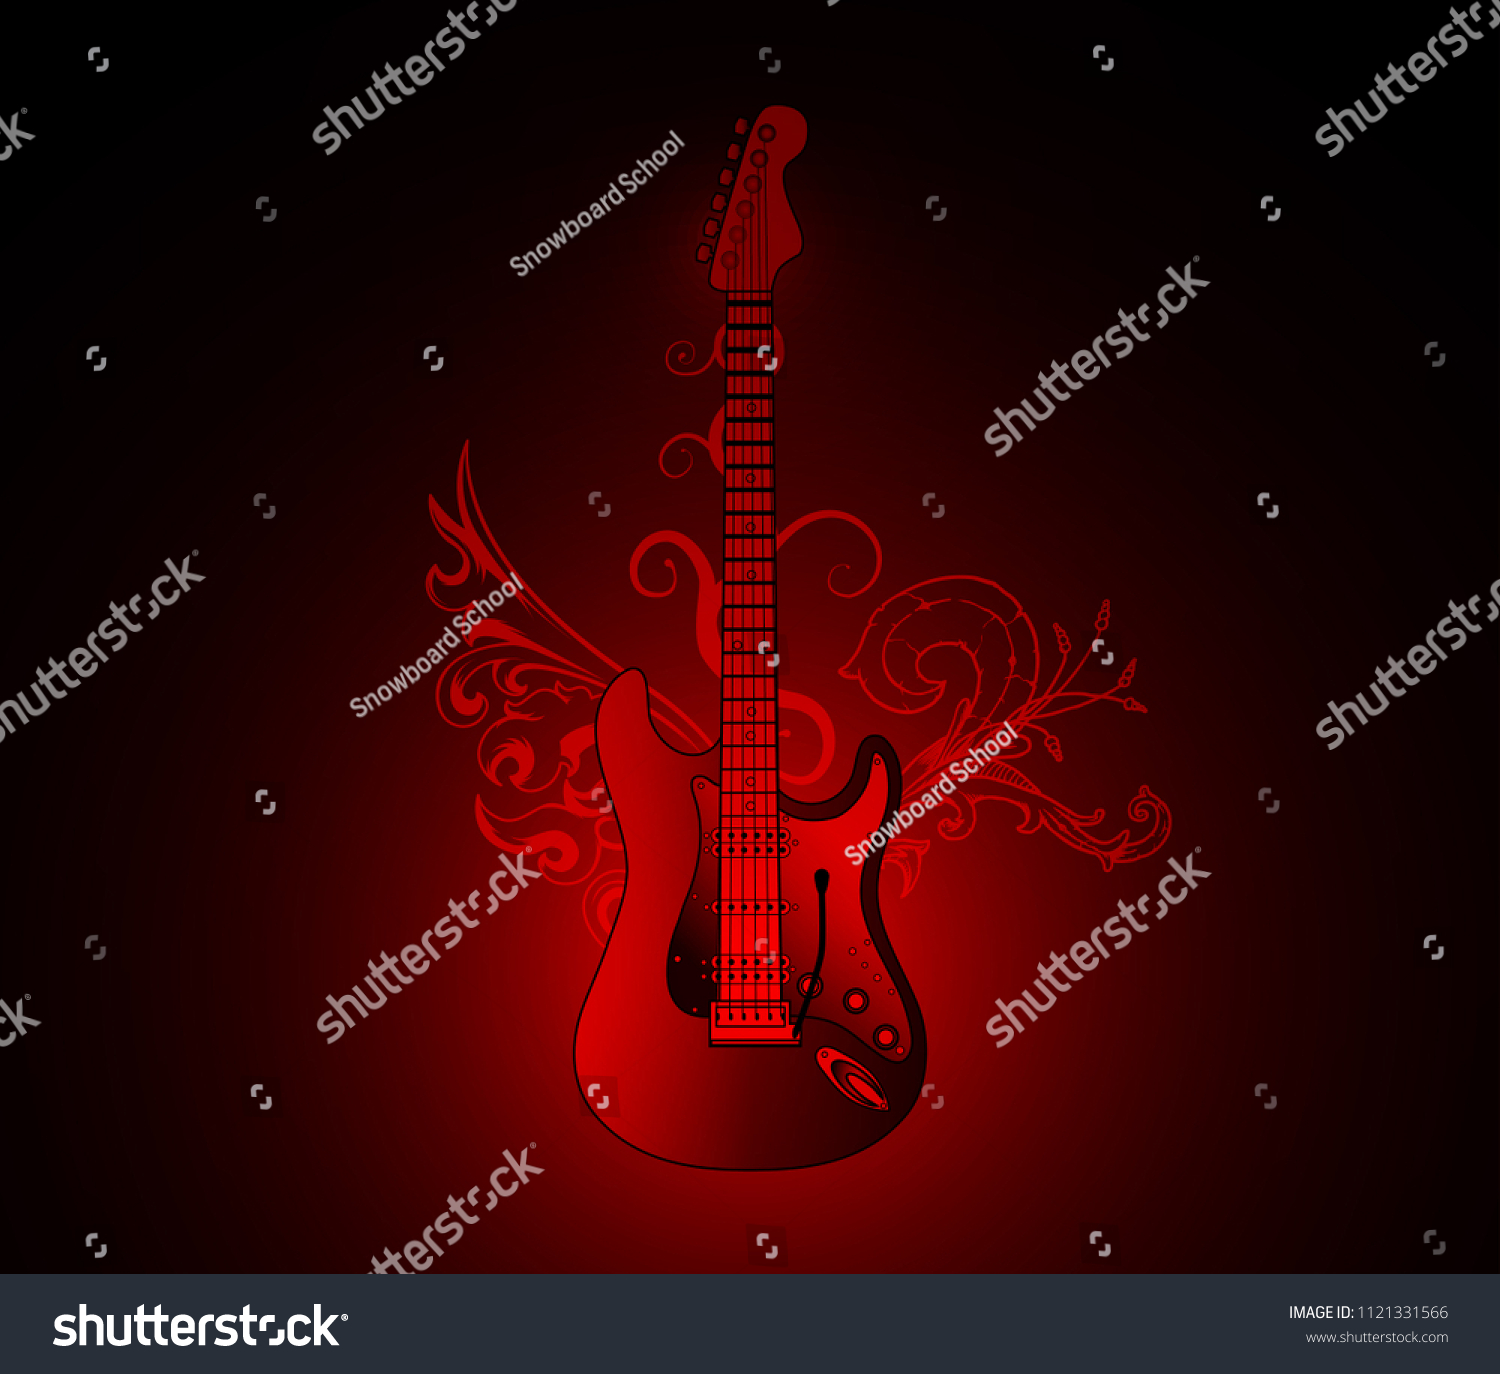 Abstract Red Electric Guitar Wallpaper Stock Vector Royalty